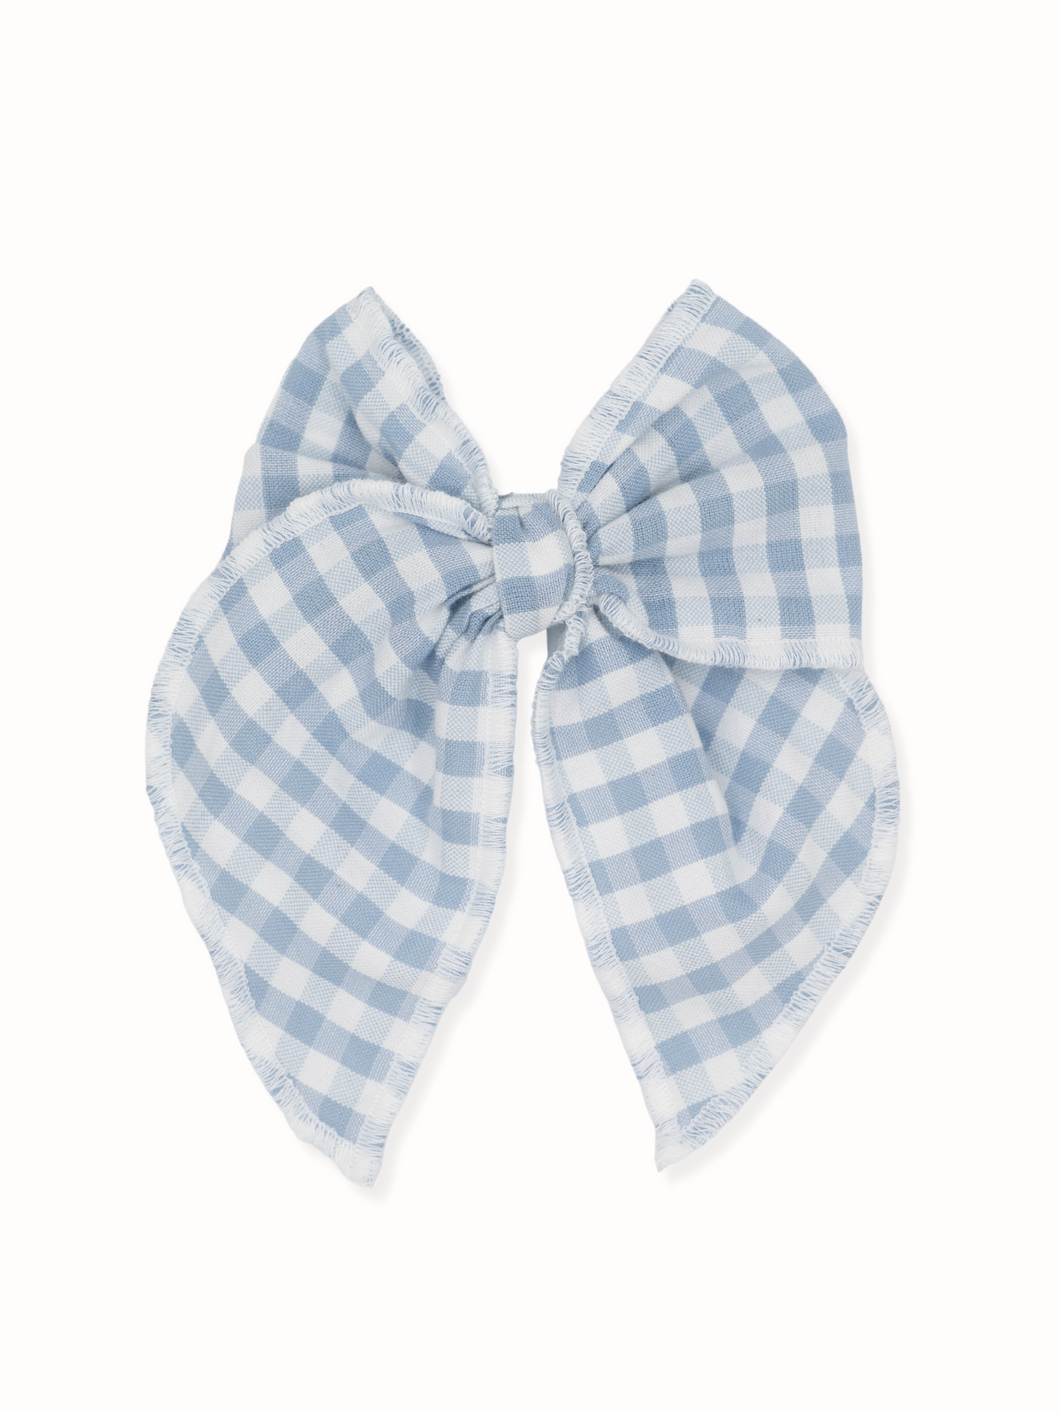 Alice Plaid Powder Blue Large Fable bow / Livy Lou Collection